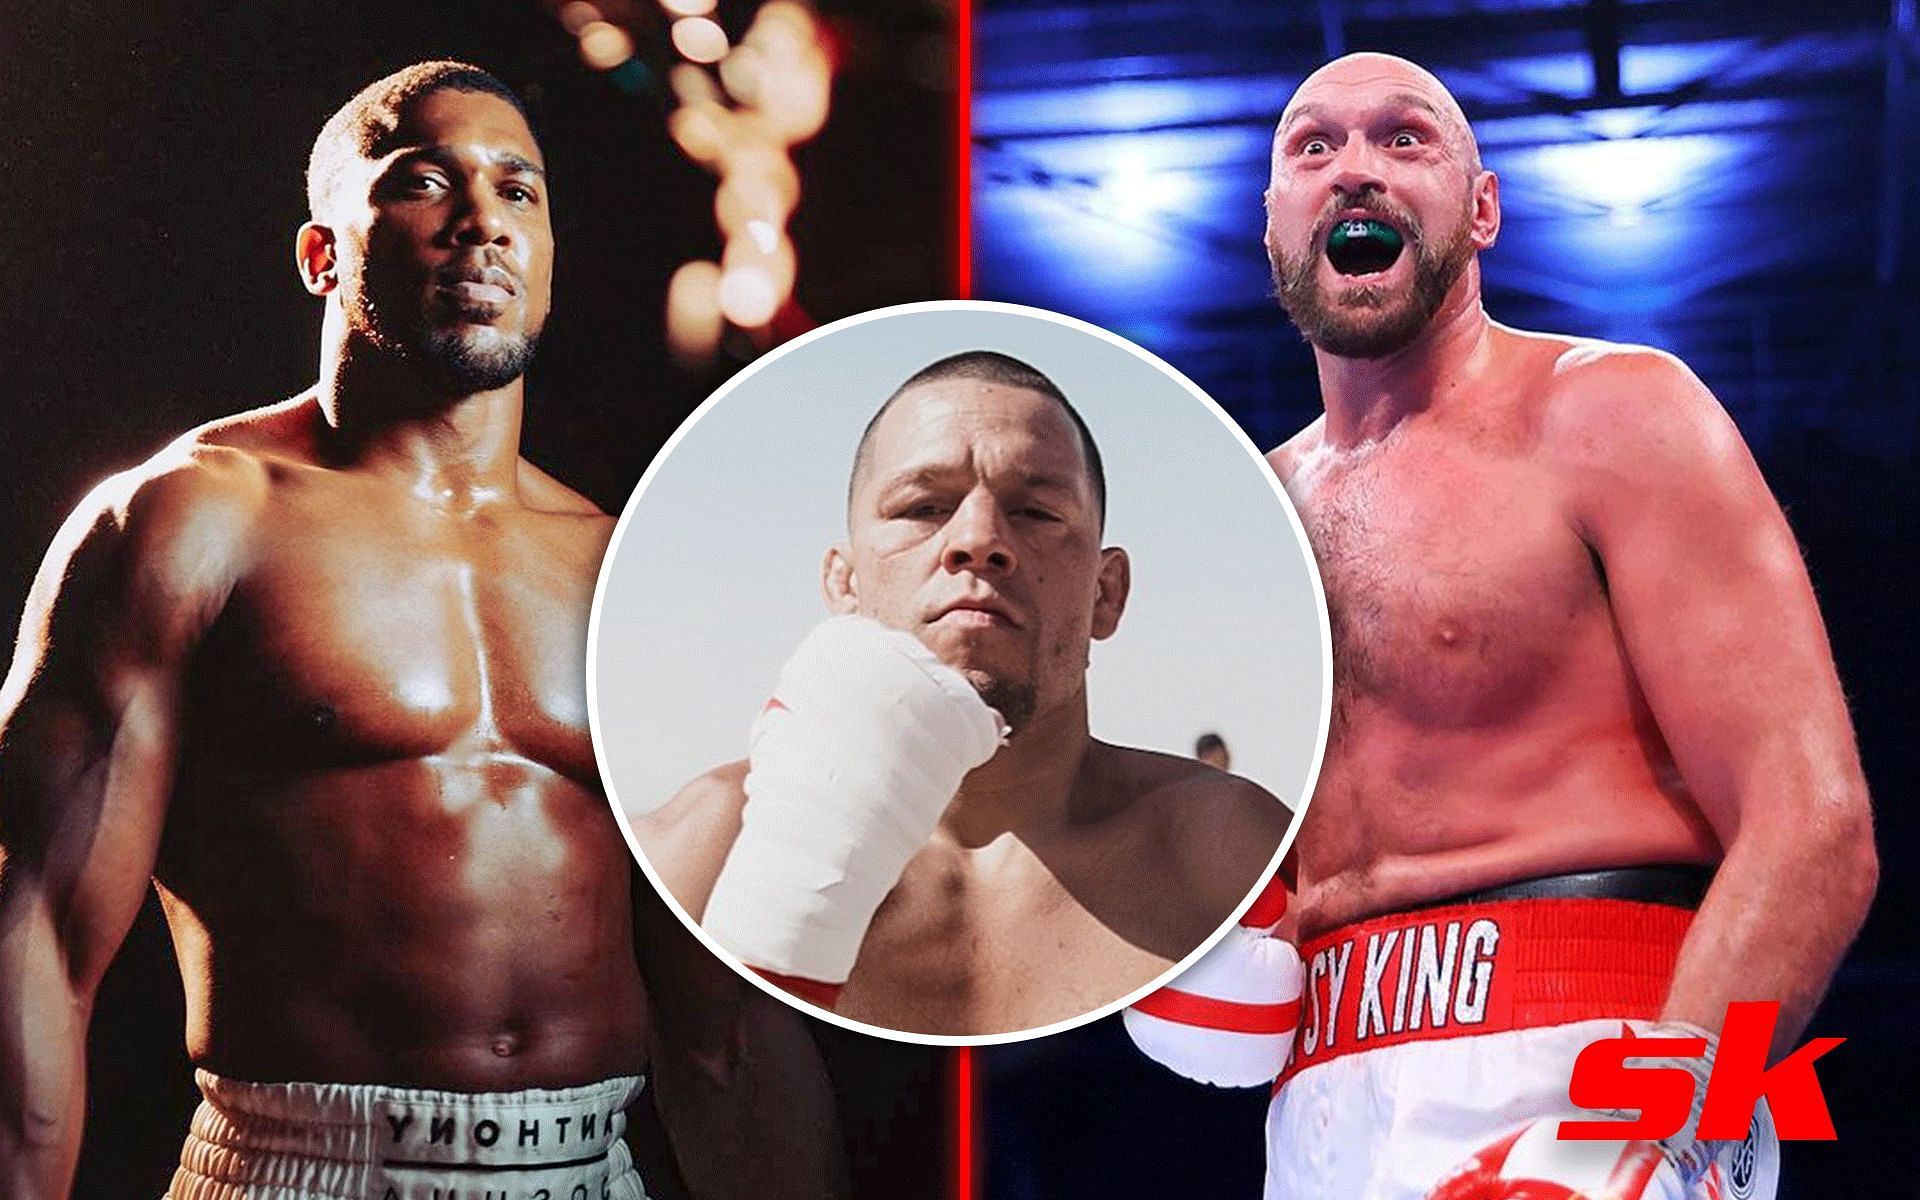 Nate Diaz (middle) is confident about defeating Anthony Joshua (left) and Tyson Fury (right) [Images courtesy: @natediaz209, @anthonyjoshua, and @tysonfury on Instagram]